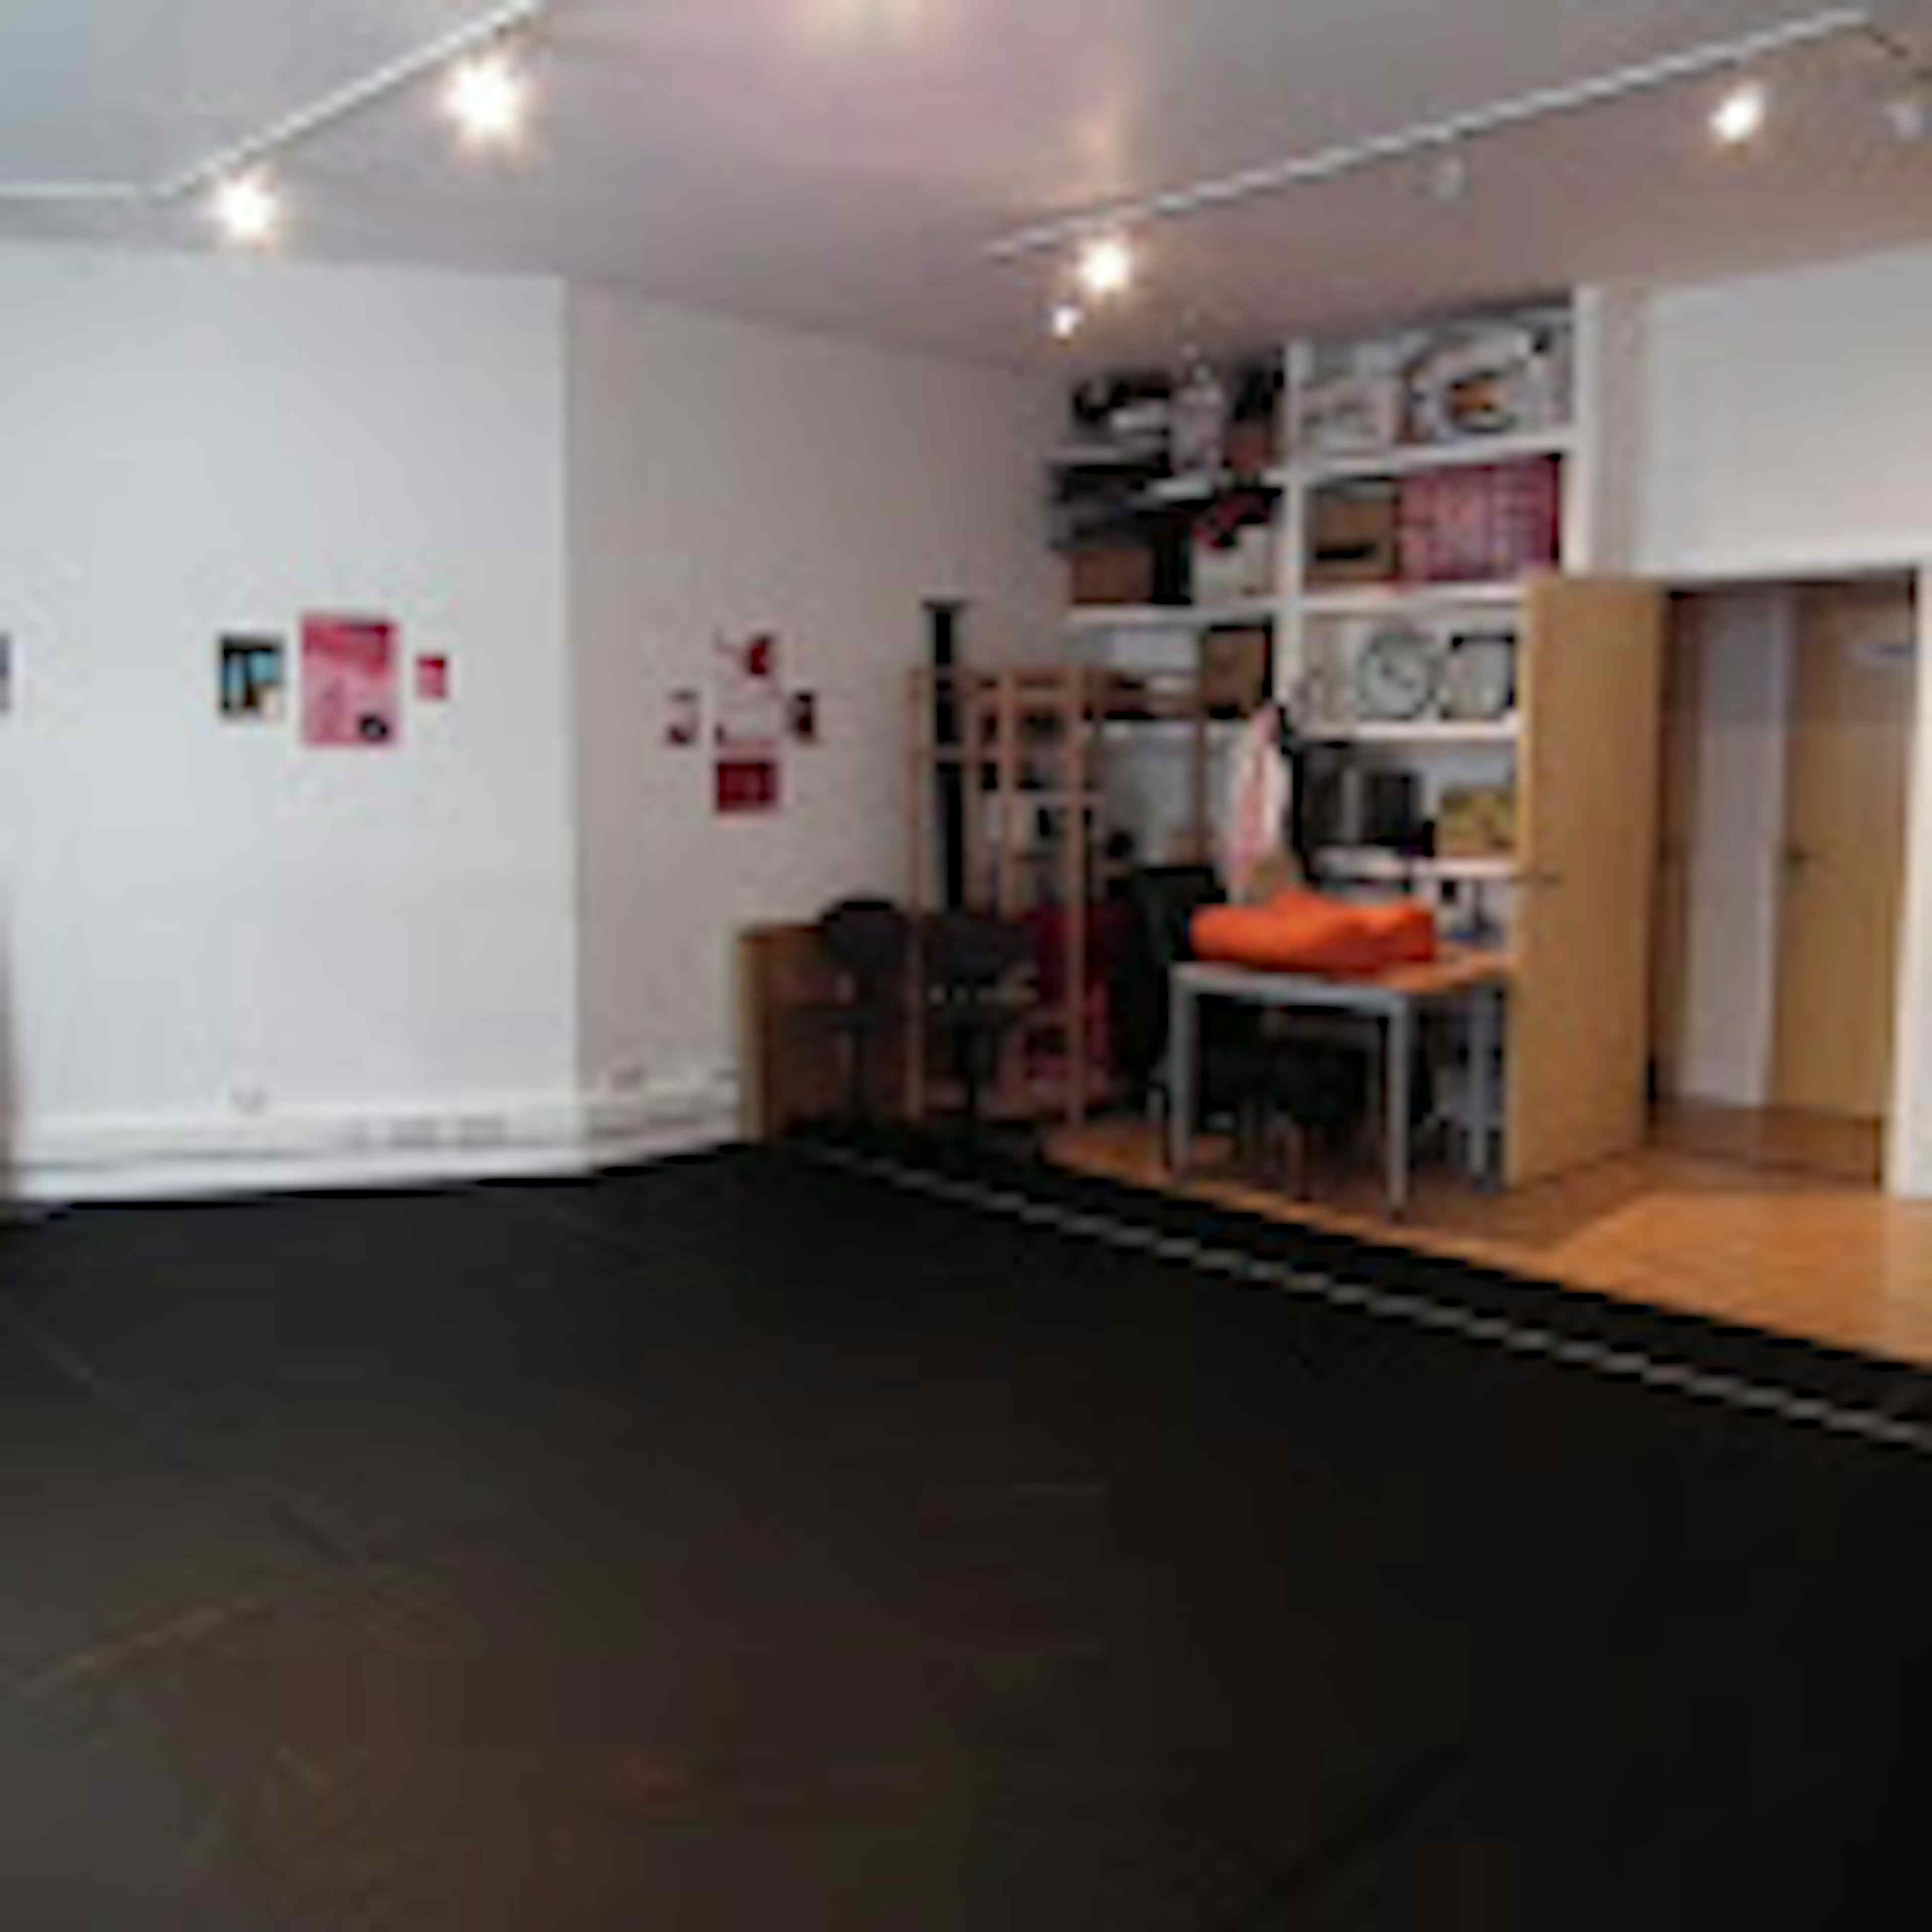 The Trap - Exchange Theatre Studios - Rehearsal Space image 3